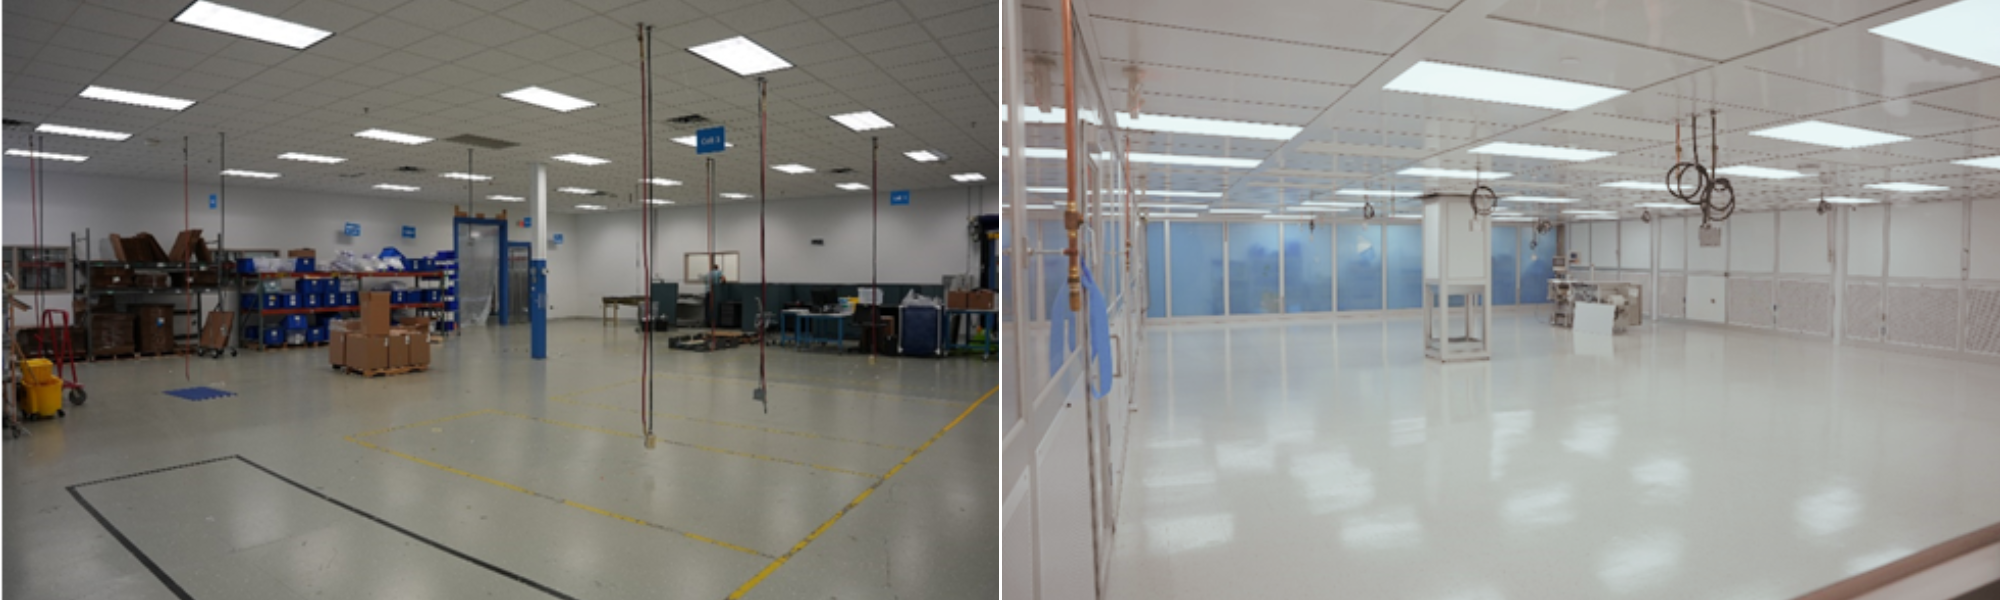 Before & After Cleanroom